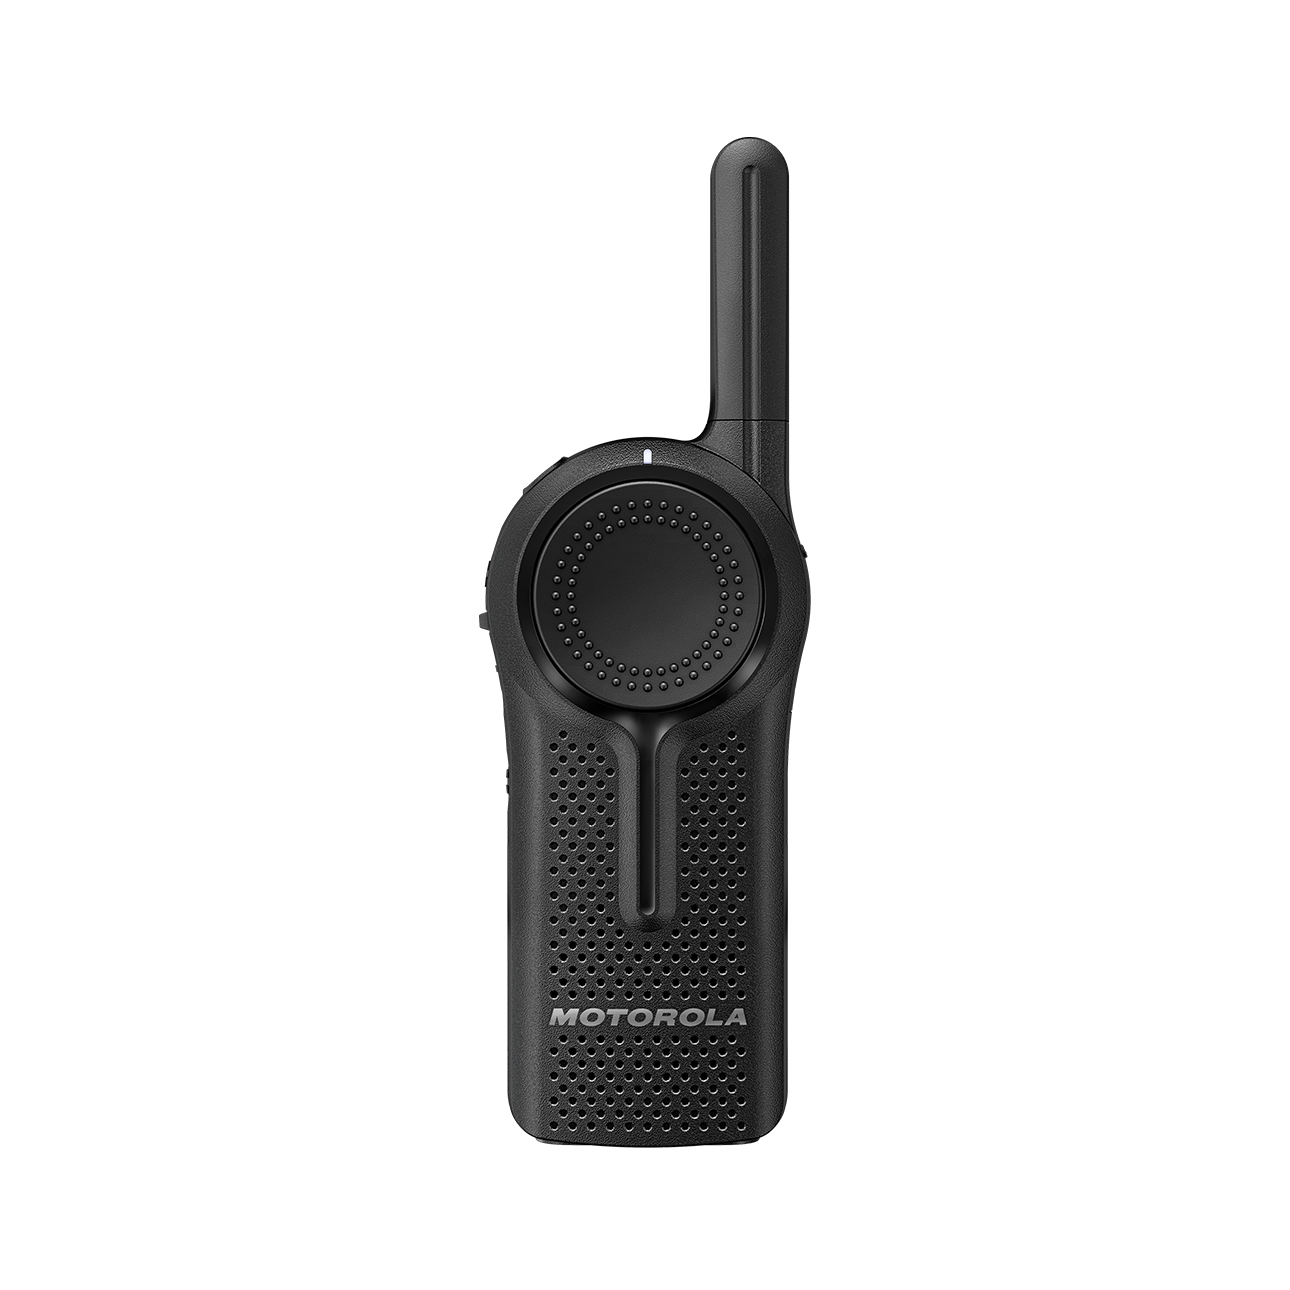 CLR446 Unlicensed Business Two-Way Radio